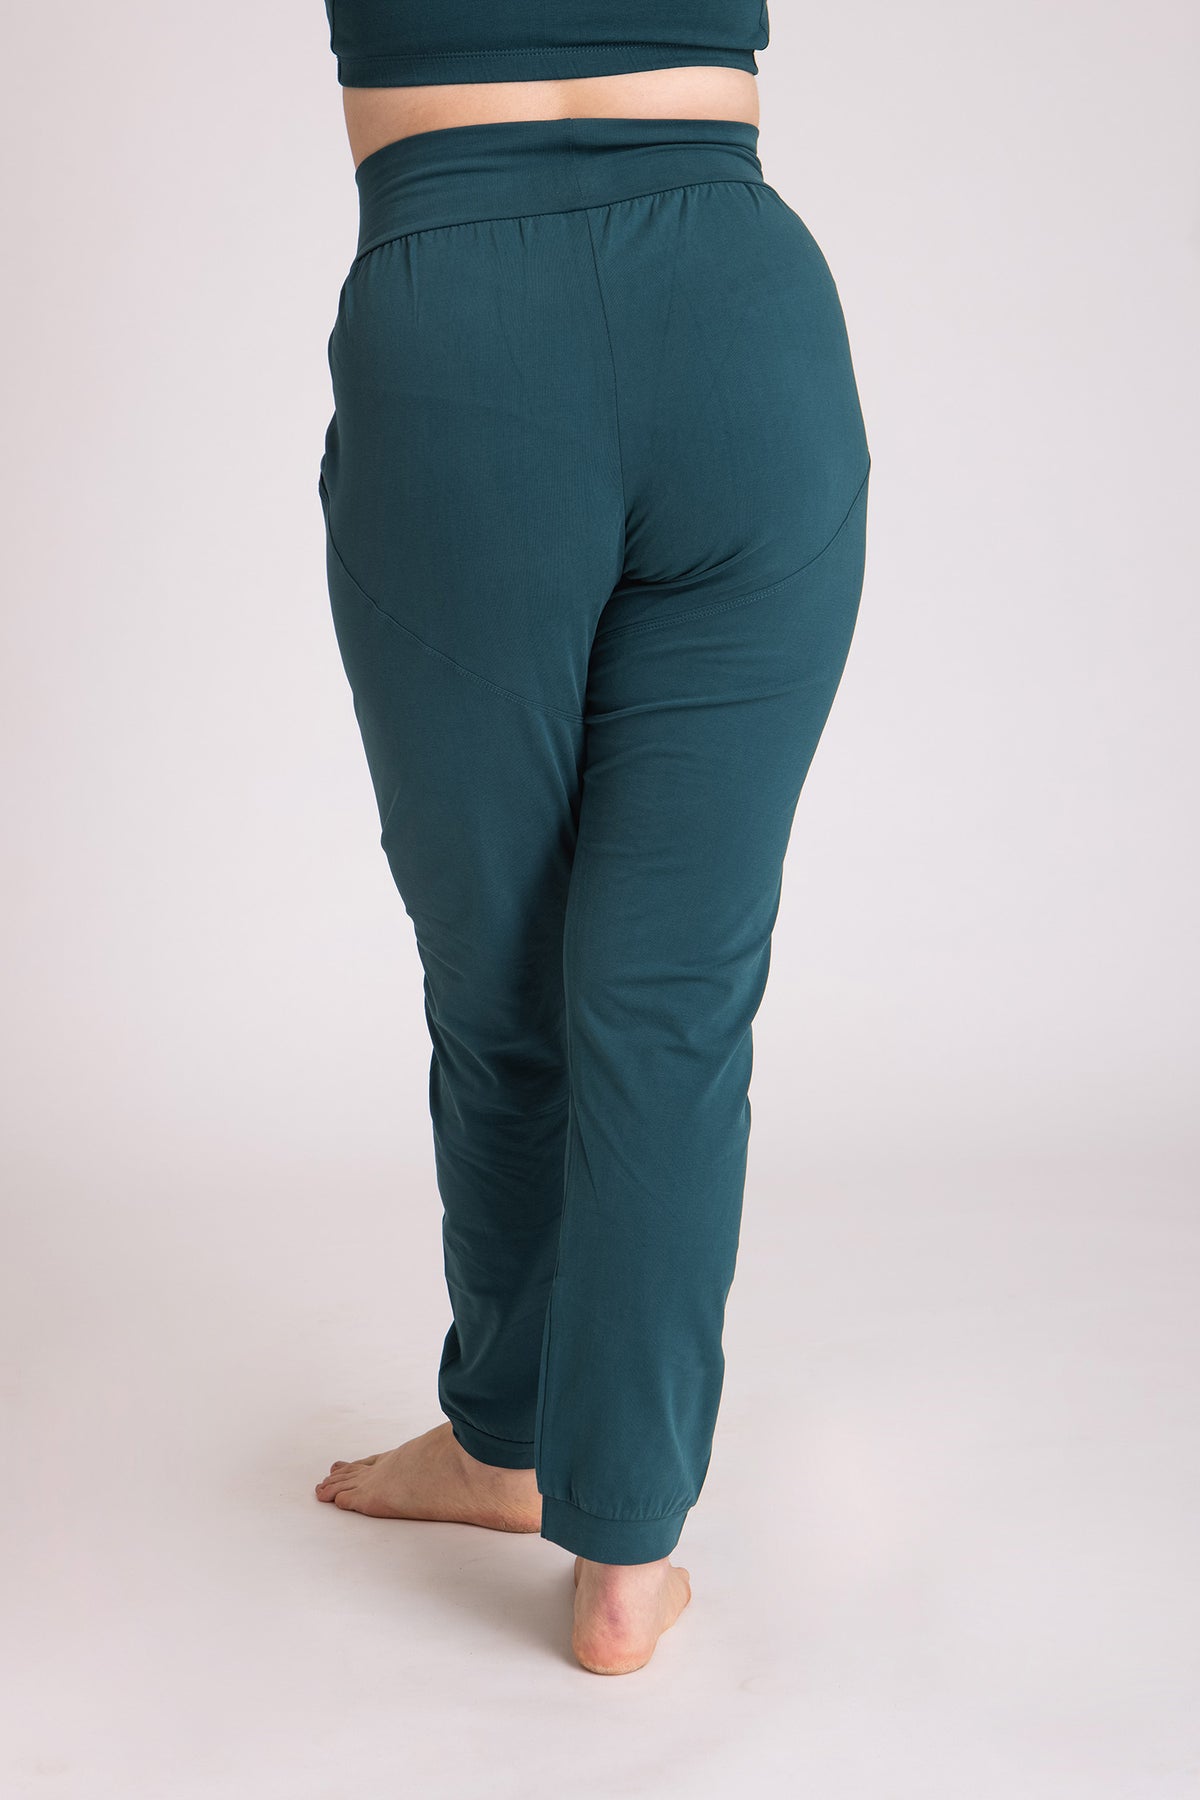 I’mPerfect Organic Cotton Unisex Slouchy Pants 35%off